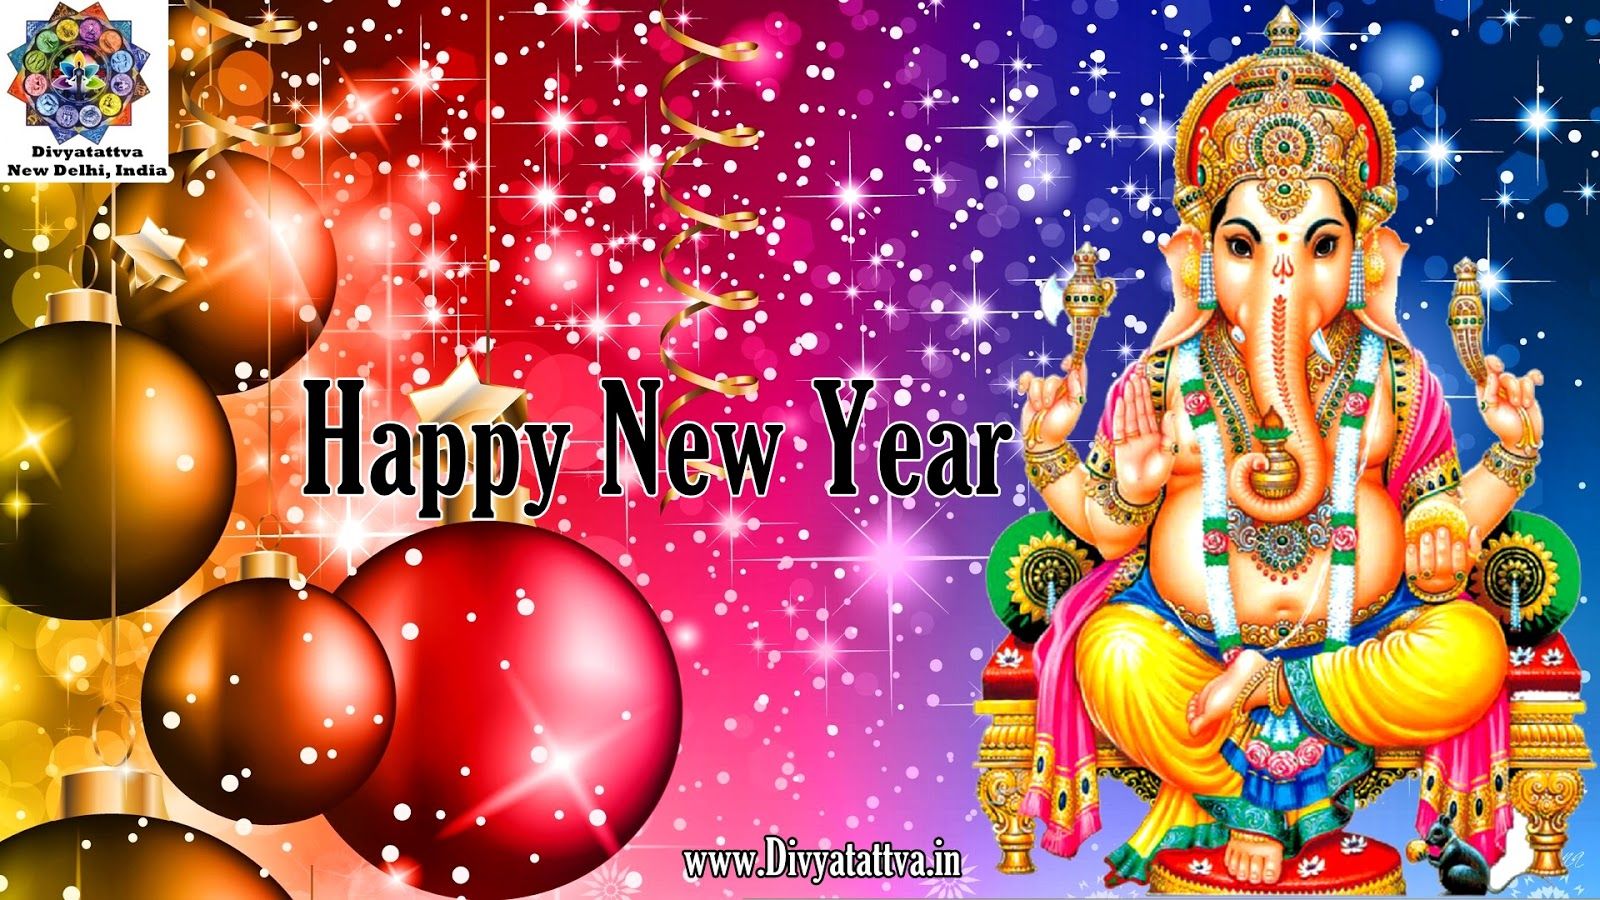 Divyatattva Astrology Free Horoscopes Psychic Tarot Yoga Tantra Occult Image Videos, New Year Messages Wallpaper HD Greetings New Year Celebrations Image